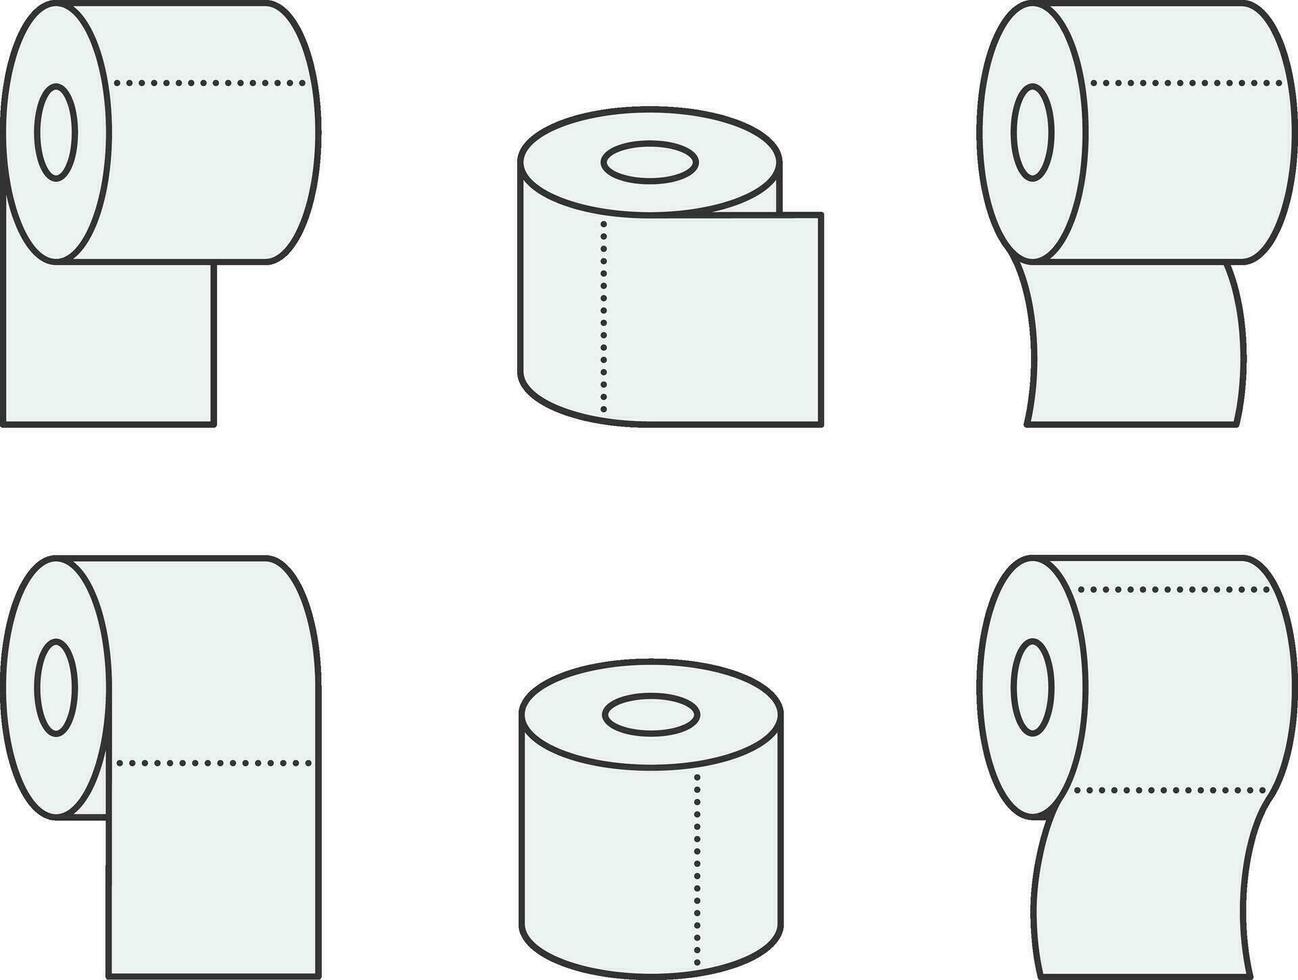 Set of sanitary toilet paper icons. Vector bathroom illustration. Hygiene clean symbol for wc.